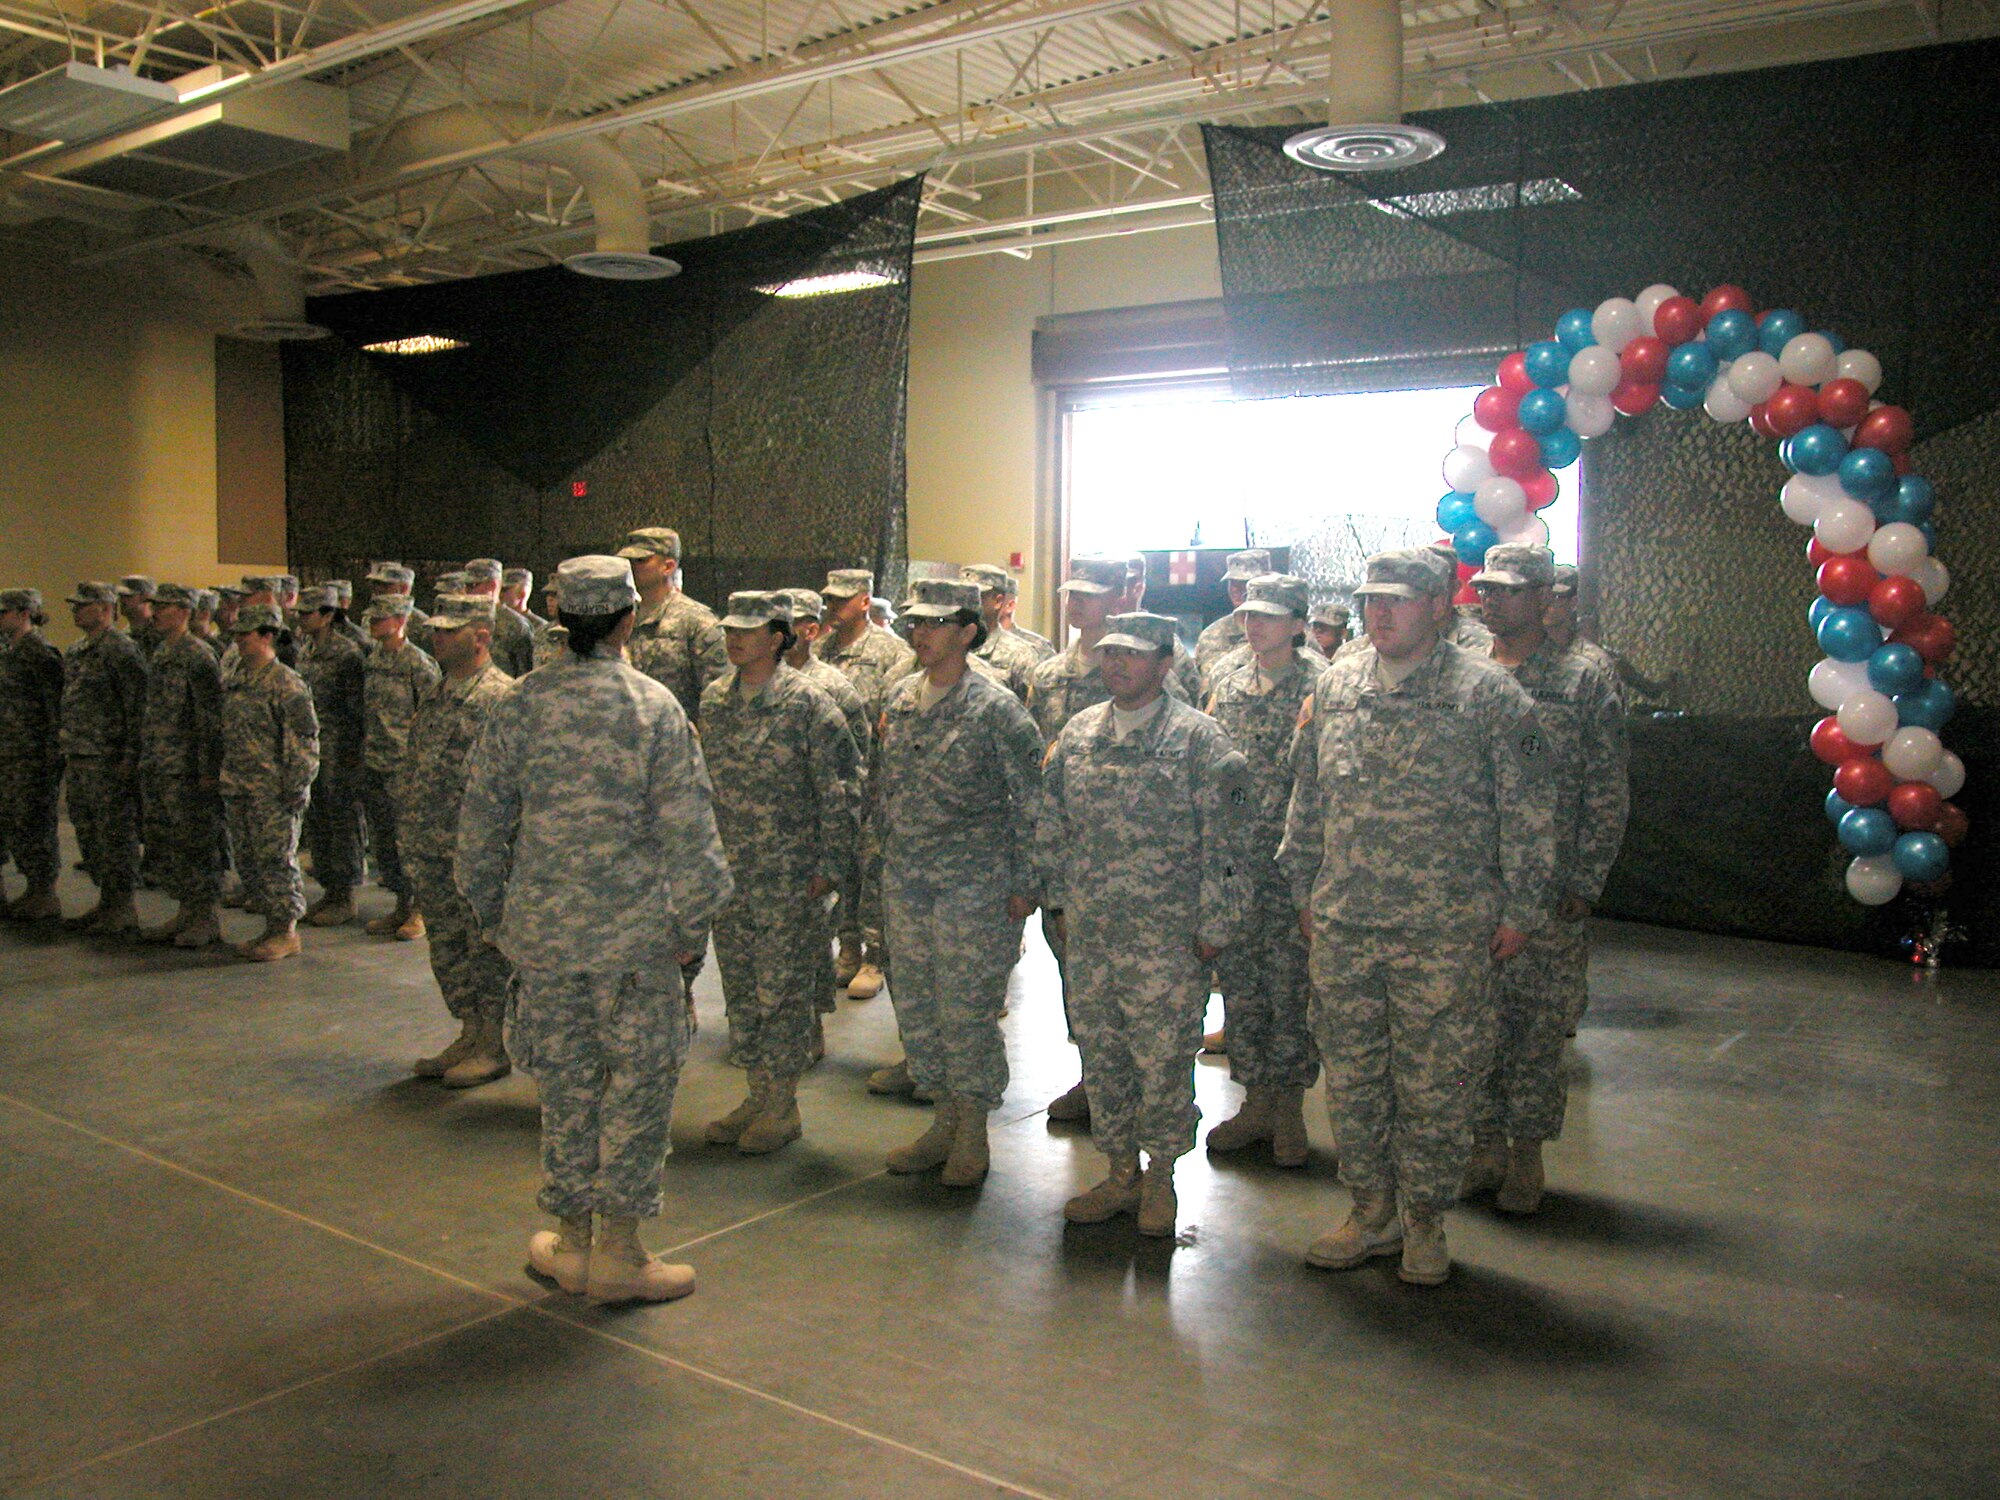 The 437th Medical Company (Ground Ambulance) form the troops during their deployment ceremony last Saturday at the National Guard Reserve Center on the open side of the base. The ceremony was attended by the Soldiers’ family and friends as well as senior leaders from their higher headquarters. (U.S. Air Force photo by Maj. Don Traud)